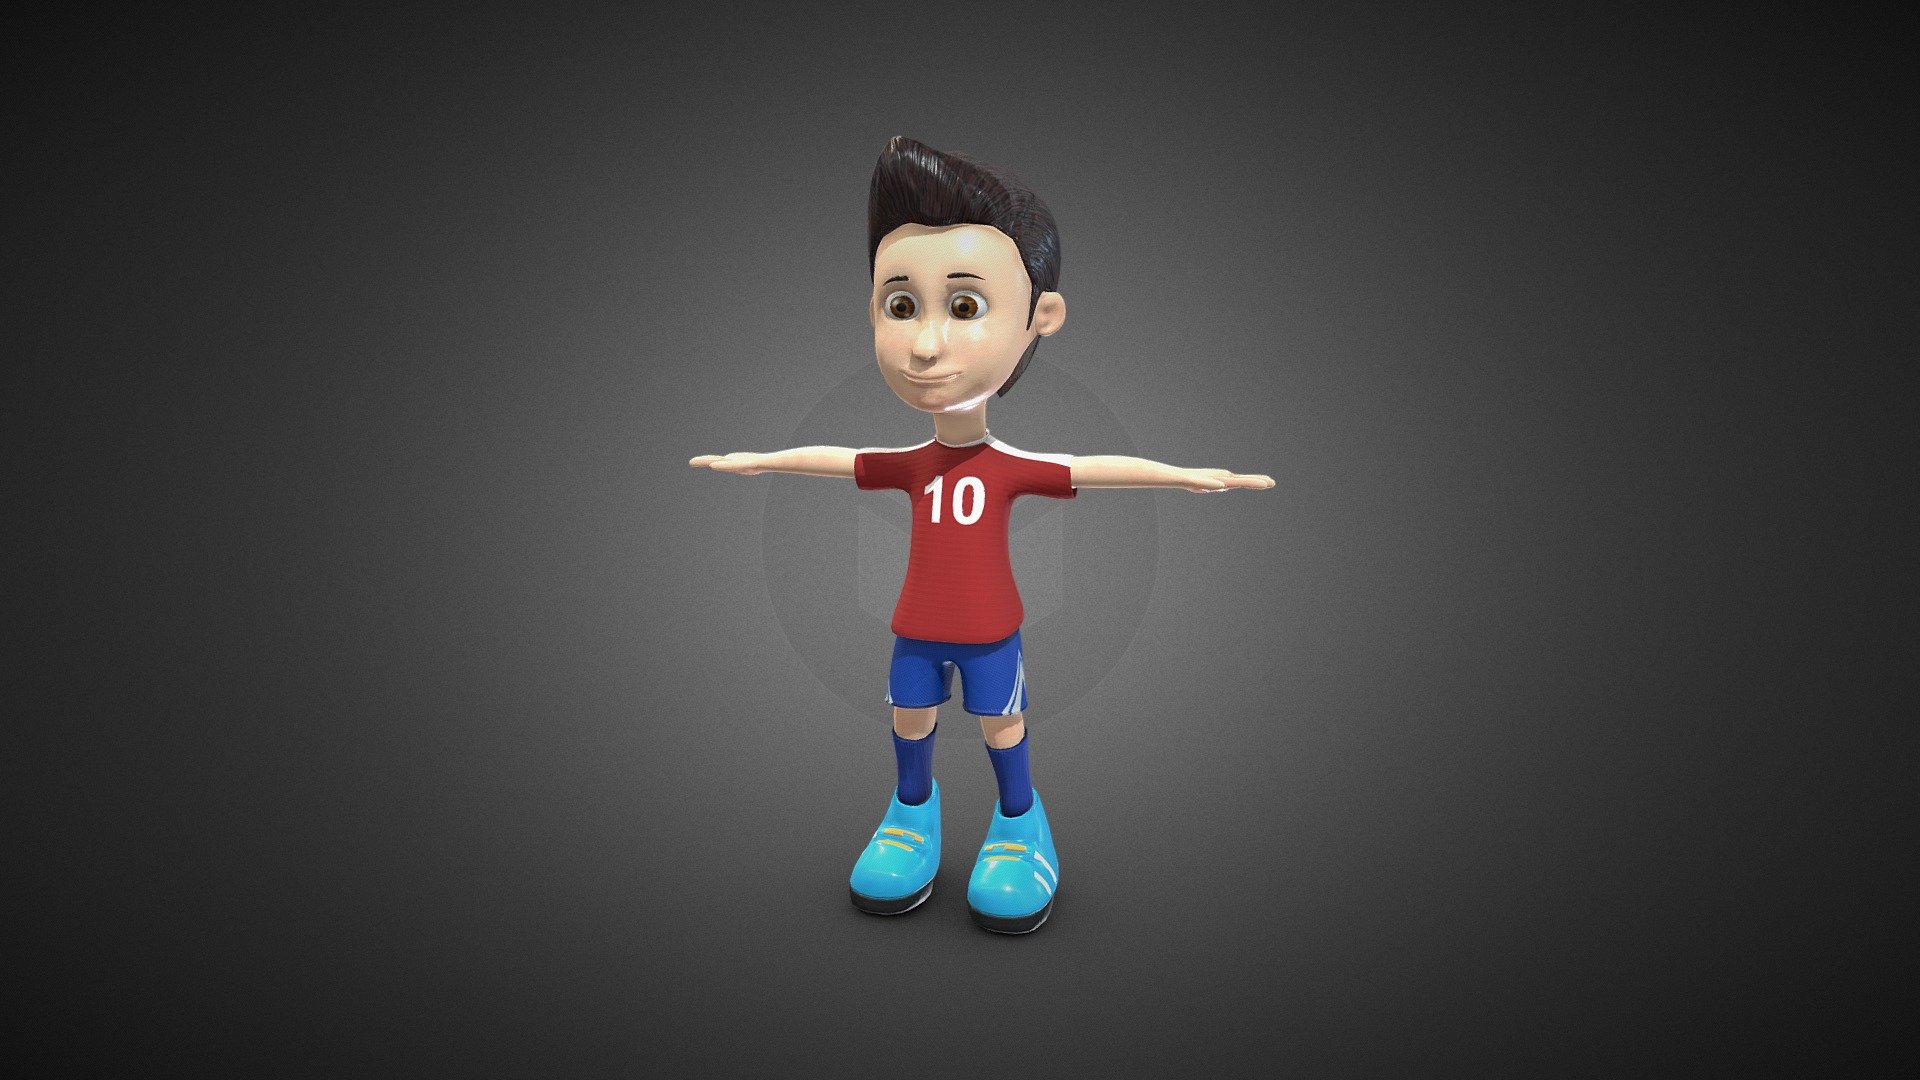 Welcome to our free 3D model of a football player!

This high-quality model is perfect for any CGI artist looking to add a touch of realism to their sports-related projects. The model has been carefully crafted with attention to detail, ensuring that it looks as lifelike as possible.

One of the great things about this model is that it is not tied to any particular nation, so you can use it in a variety of settings and contexts. Whether you're working on a short film, a video game, or a commercial, this model is sure to be a valuable asset.

The football player model is ready to be rigged and animated, making it easy to bring him to life on the pitch in your projects. To download the model, simply click the download button and follow the prompts. The model is available in a range of file formats, making it easy to use in a variety of software programs.

We hope you enjoy using the football player model in your projects, and we look forward to seeing what you create with it. Happy creating! - Football Player - Portugal - Download Free 3D model by neshallads 3d model